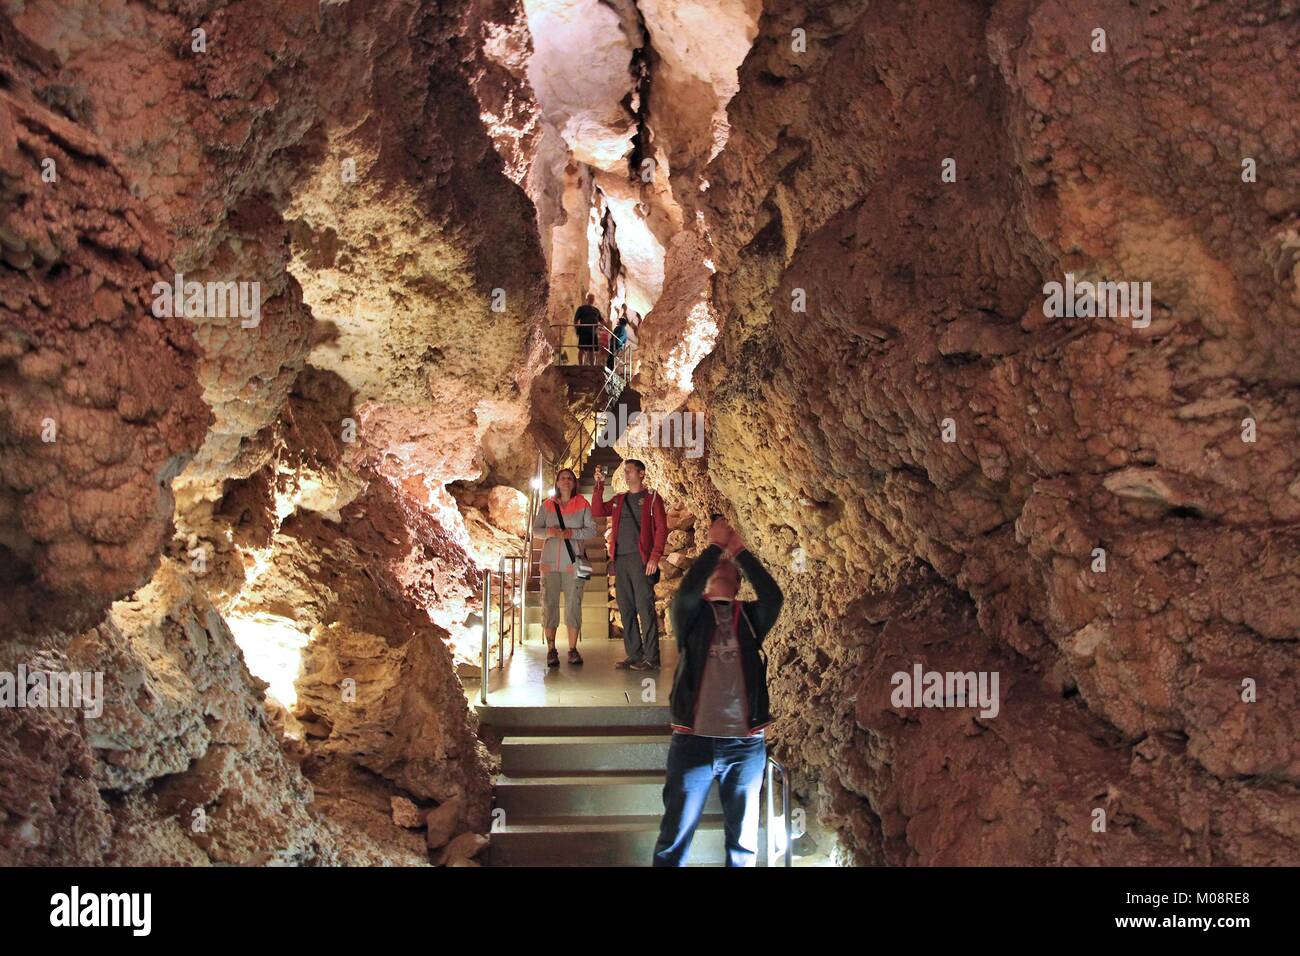 BUDAPEST, HUNGARY - JUNE 21, 2014: People visit Szemlohegyi Cave in Budapest. Budapest has the largest thermal water cave system in the world. Stock Photo